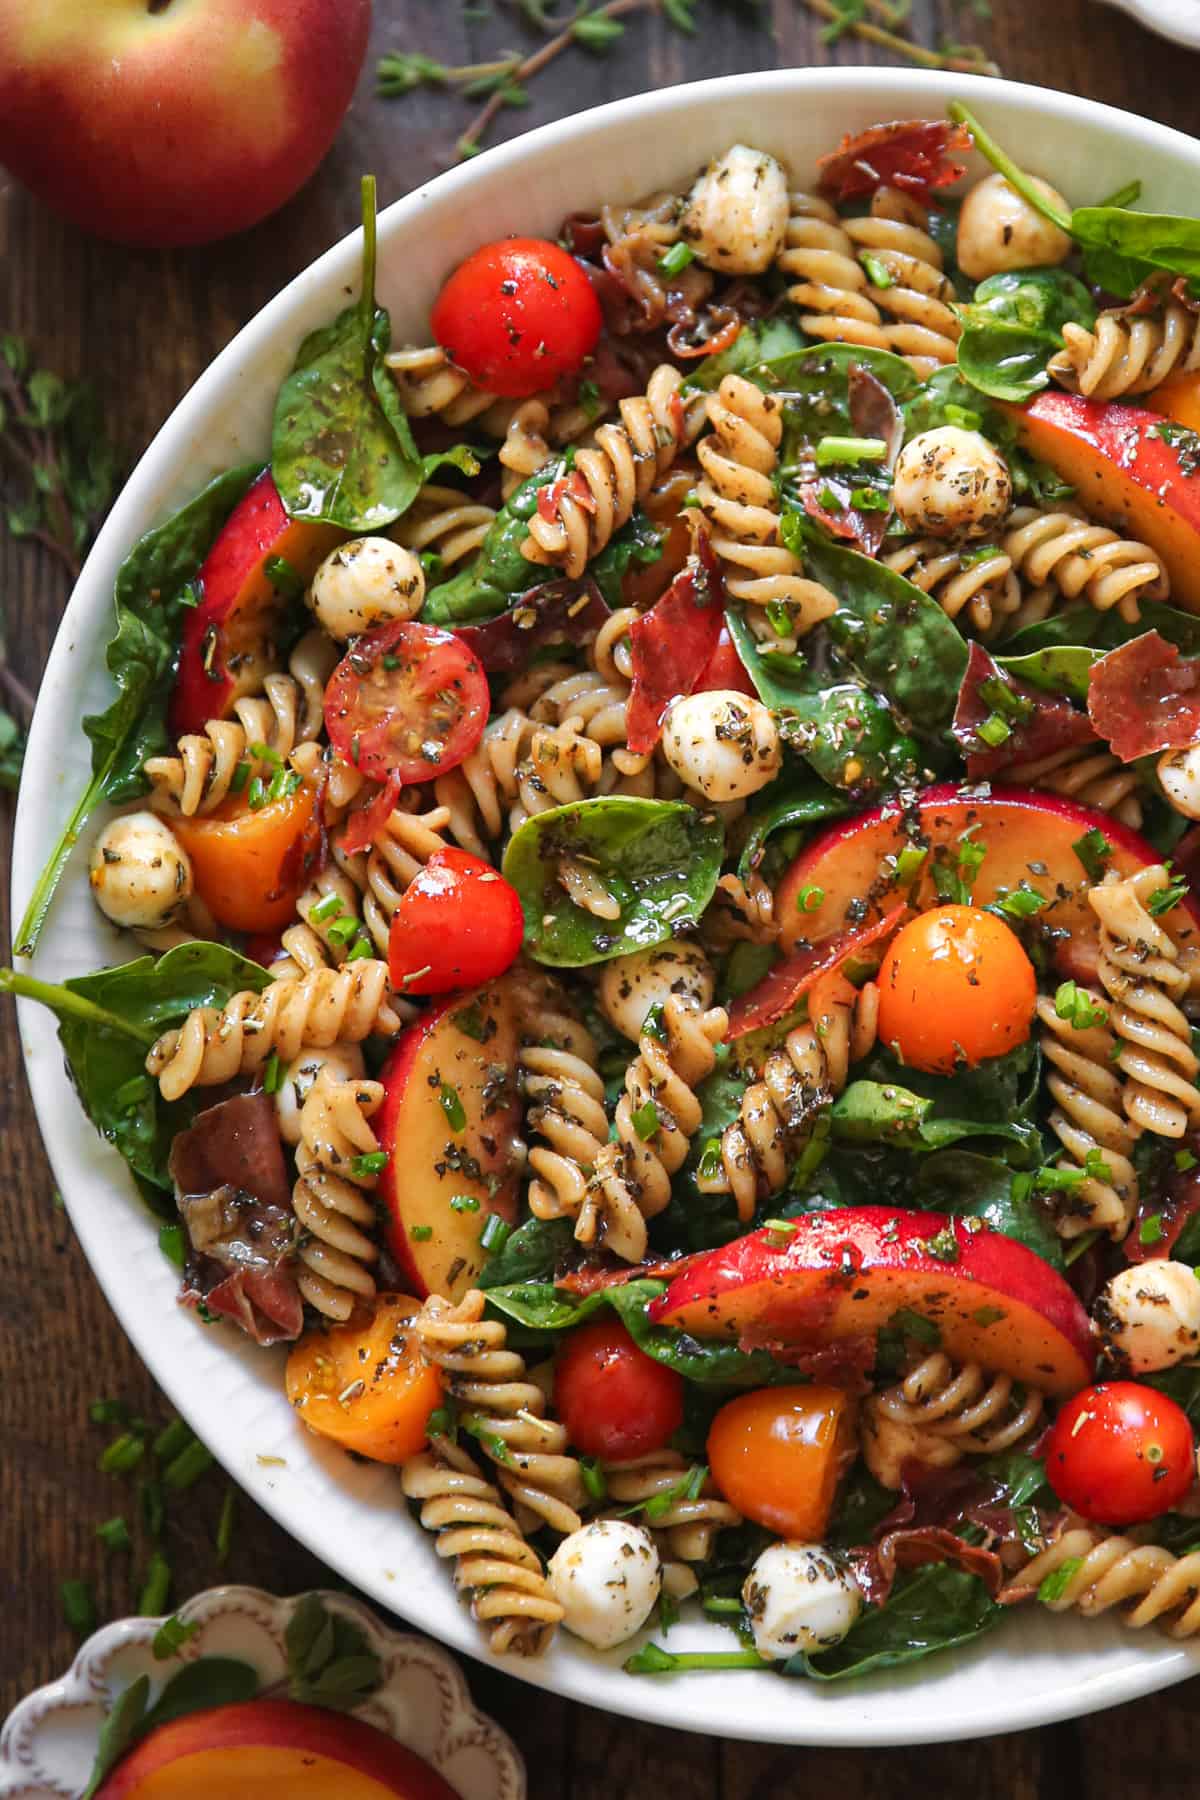 Summer Pasta Salad with Peaches, Spinach, Tomatoes, and Mozzarella Cheese in a bowl